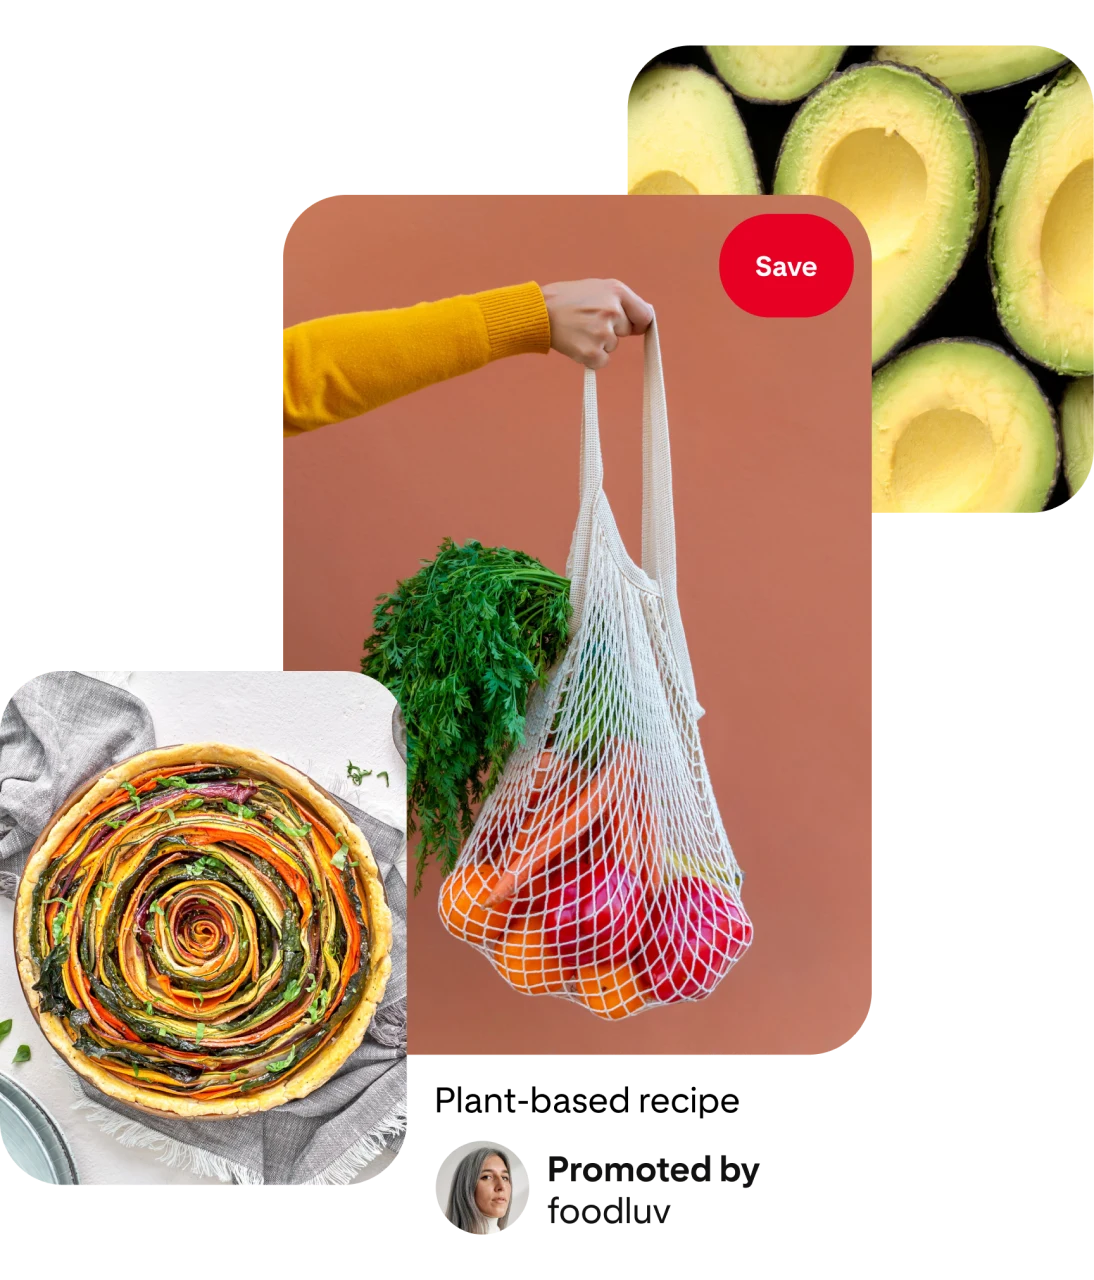 Collage of Pins: an aerial view of a colourful, swirled vegetable tart. A white hand in a yellow sleeve holds a white-mesh shopping bag with orange and yellow vegetables, green stems coming out of the bag. An aerial view of bright green avocado halves.